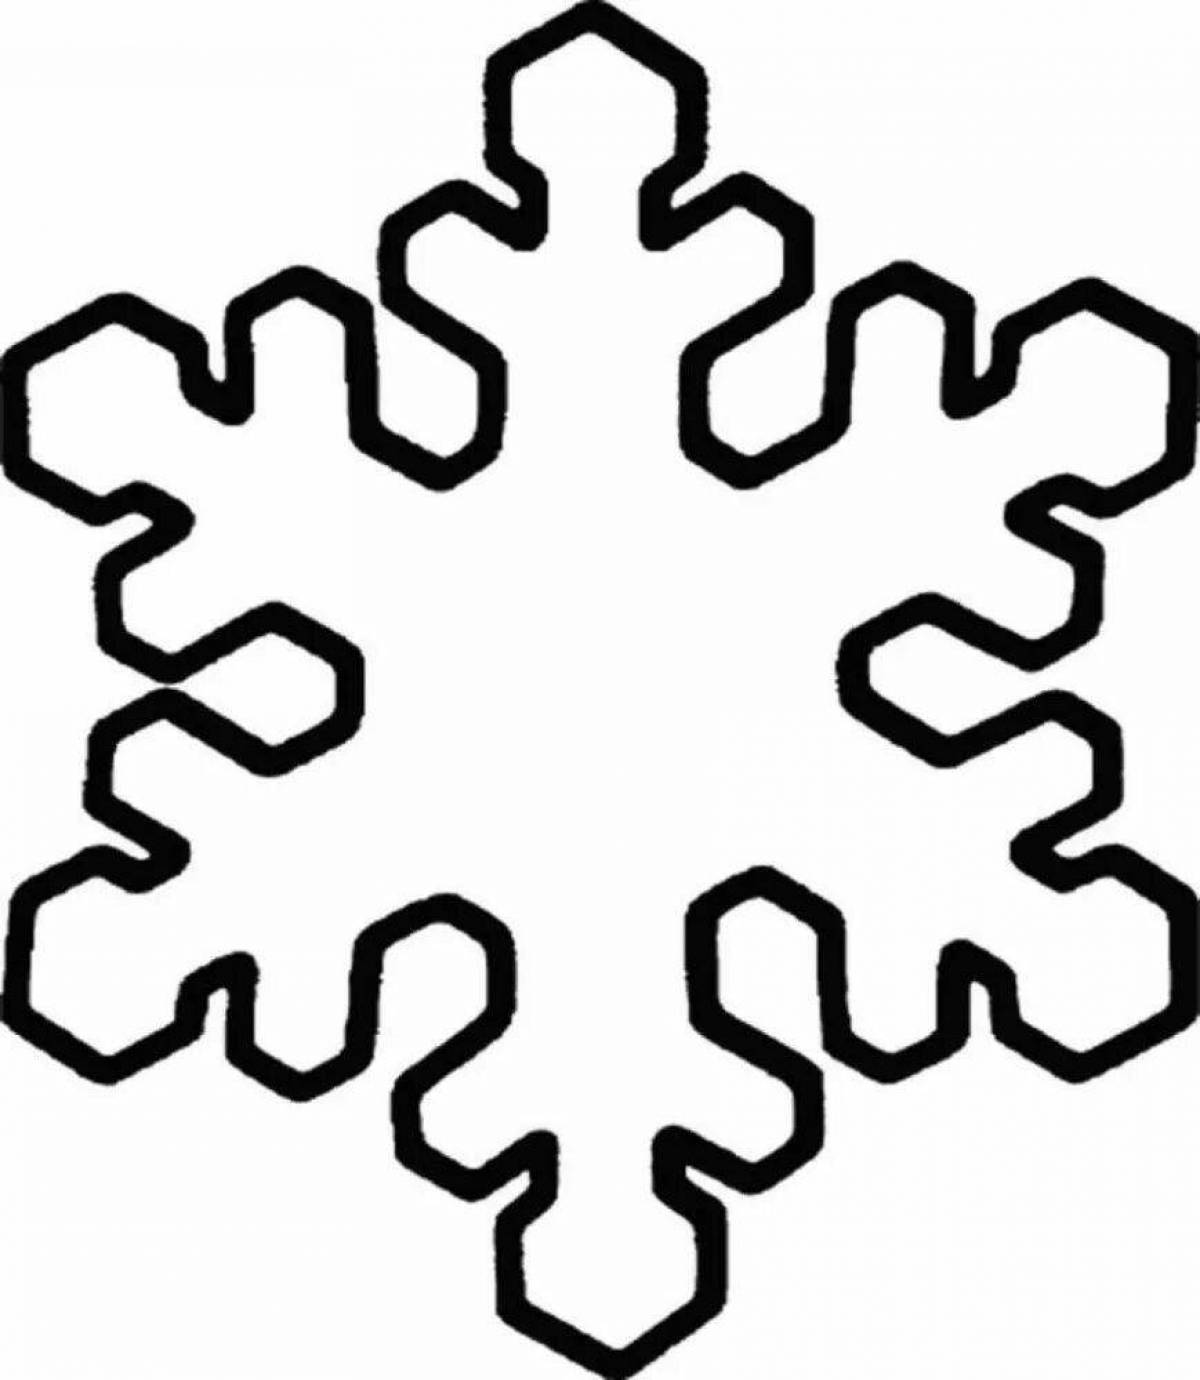 A fun snowflake coloring book for kids